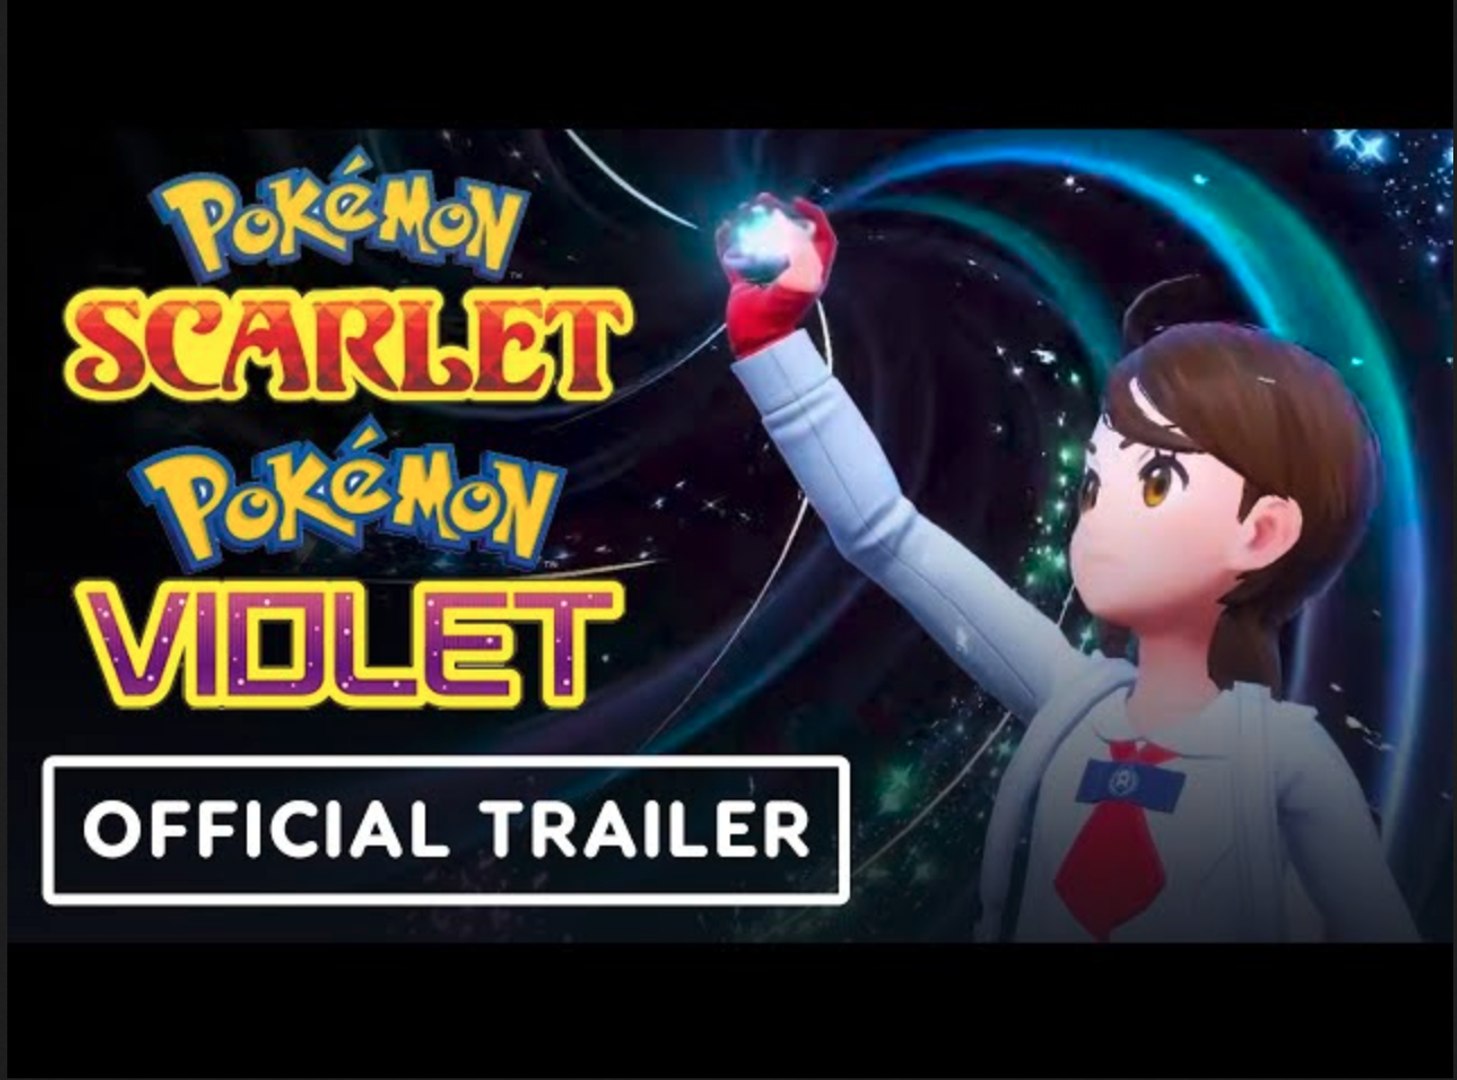 How to Setup & Play Pokémon Scarlet and Violet On Mobile - video Dailymotion